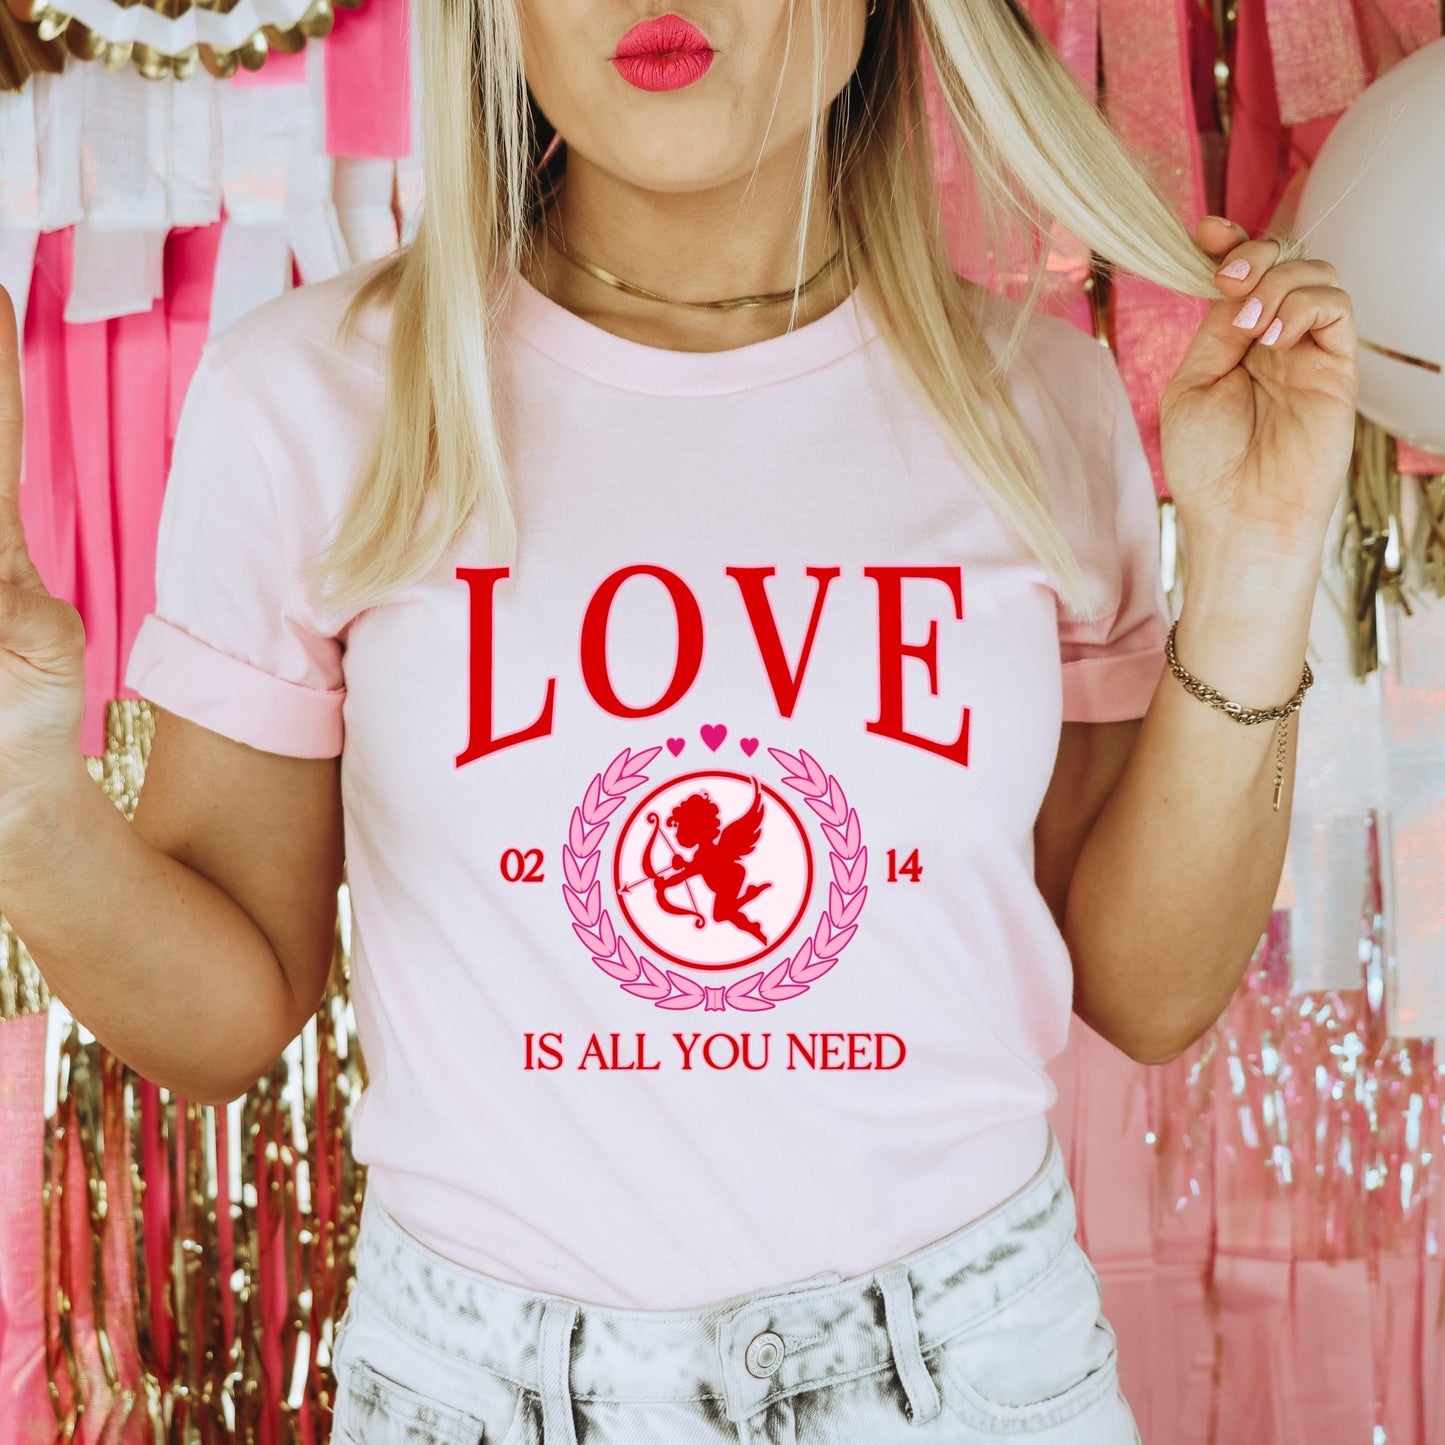 Red and pink cupid "Love is all you need" iron on heat transfer